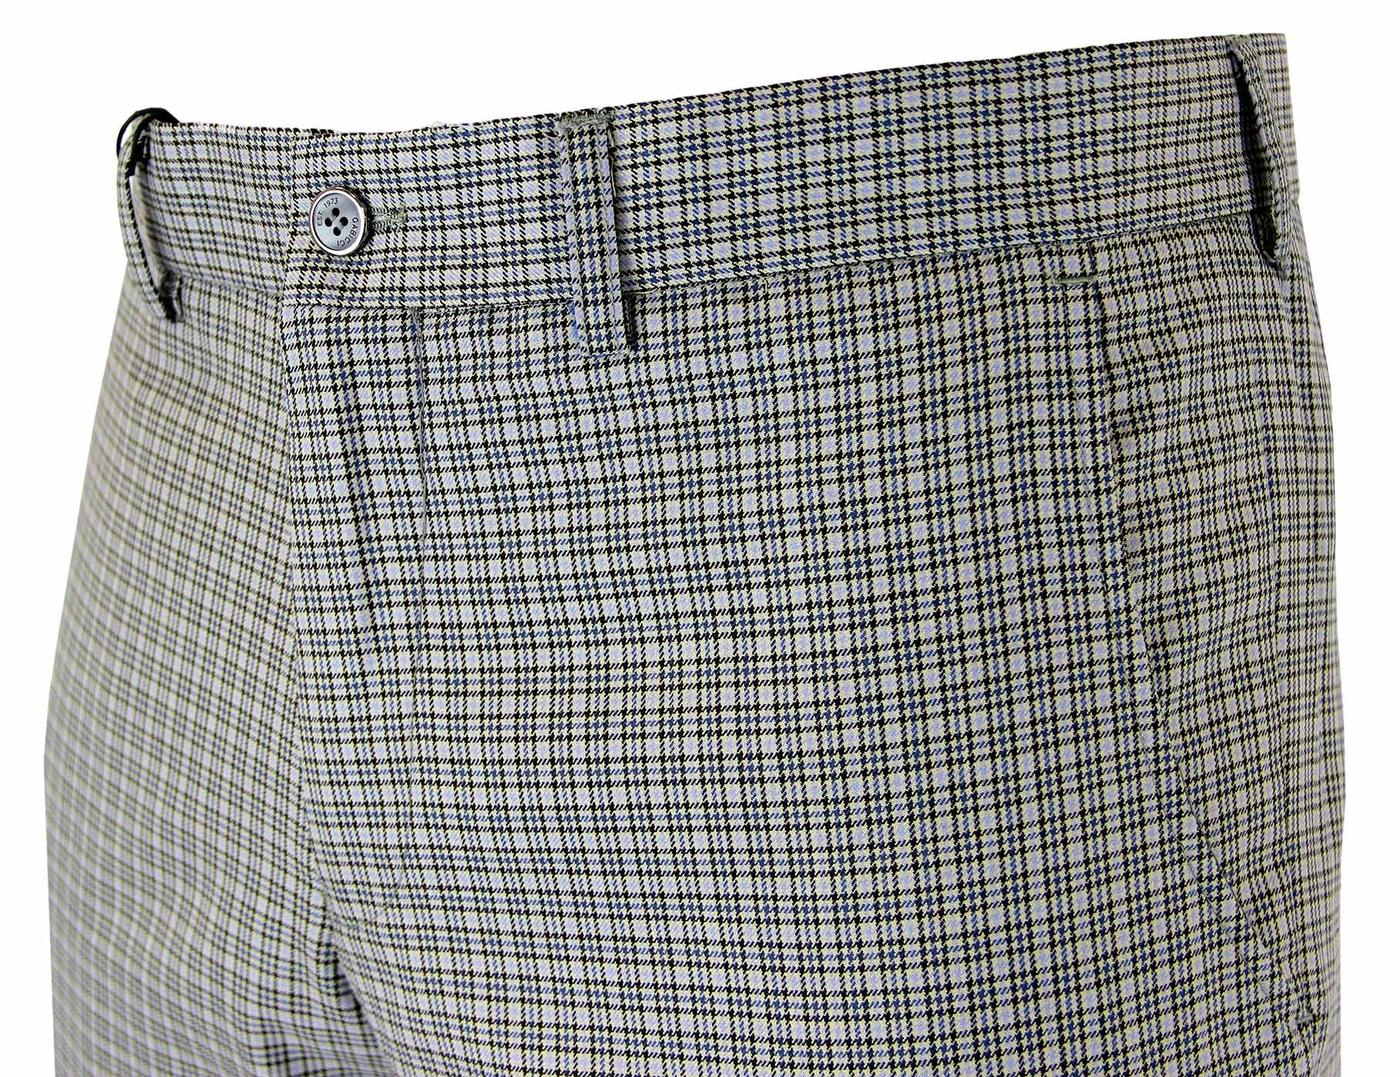 GABICCI VINTAGE Retro 1960s Mod Dogtooth Check Trousers in Pumice